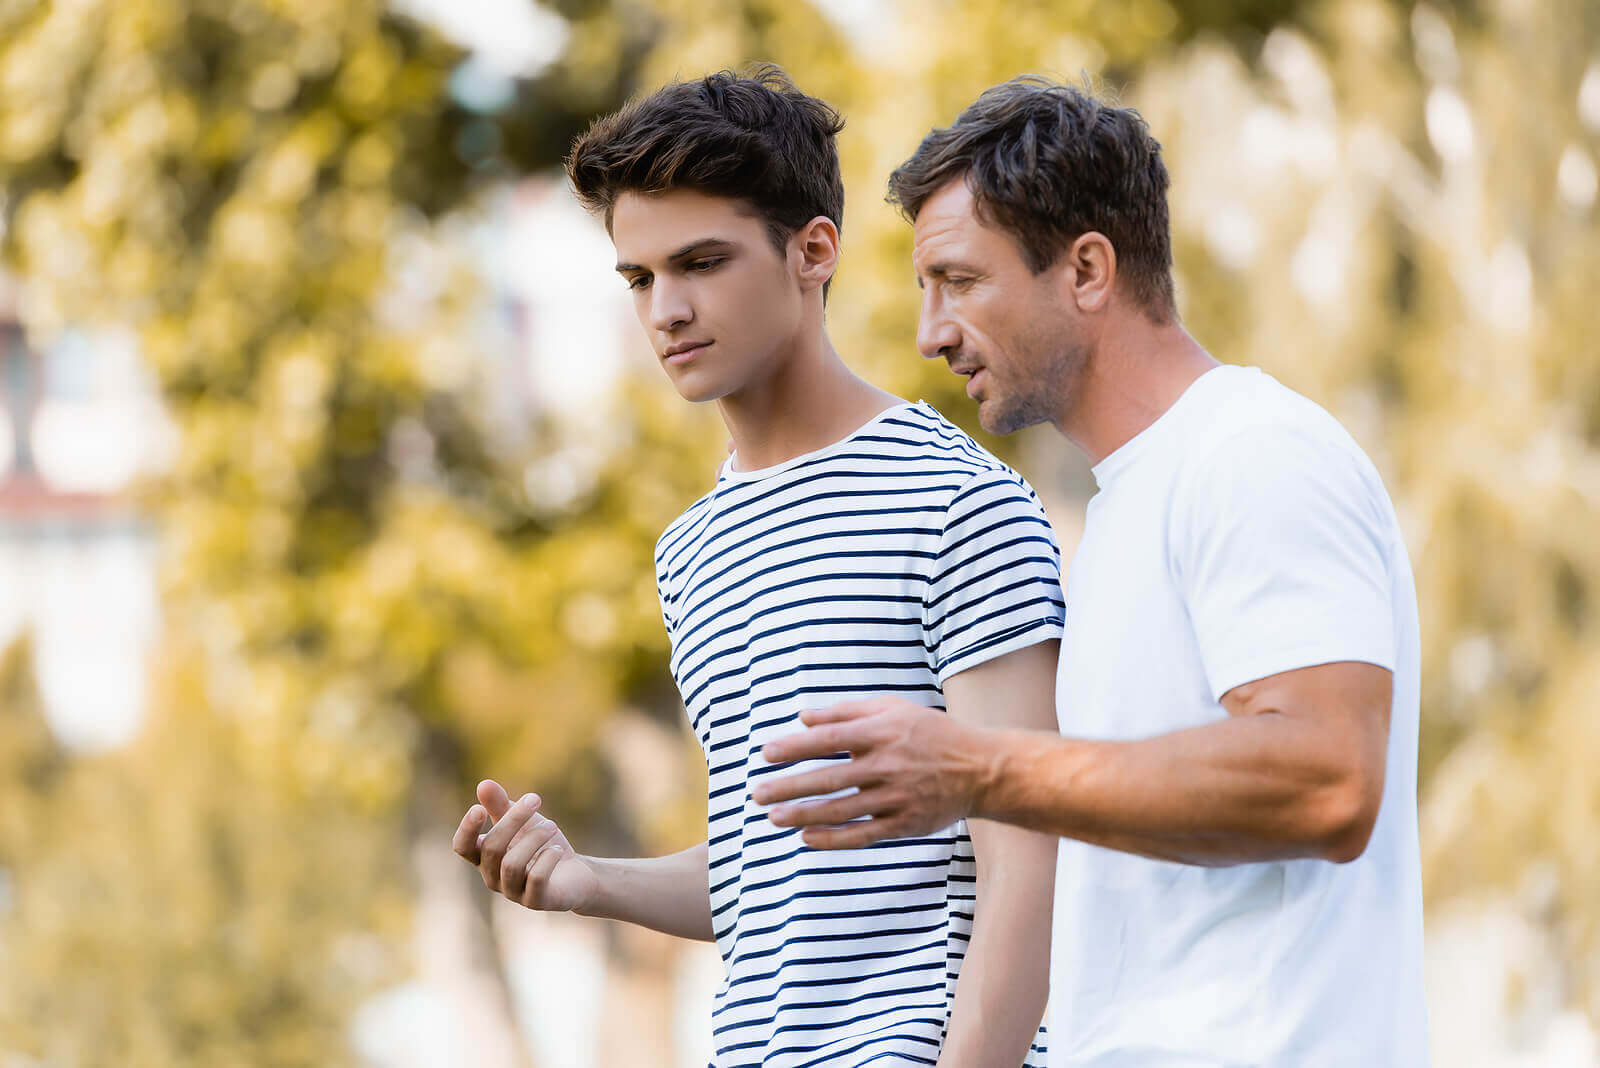 20 Questions to Get to Know Your Teenager Better